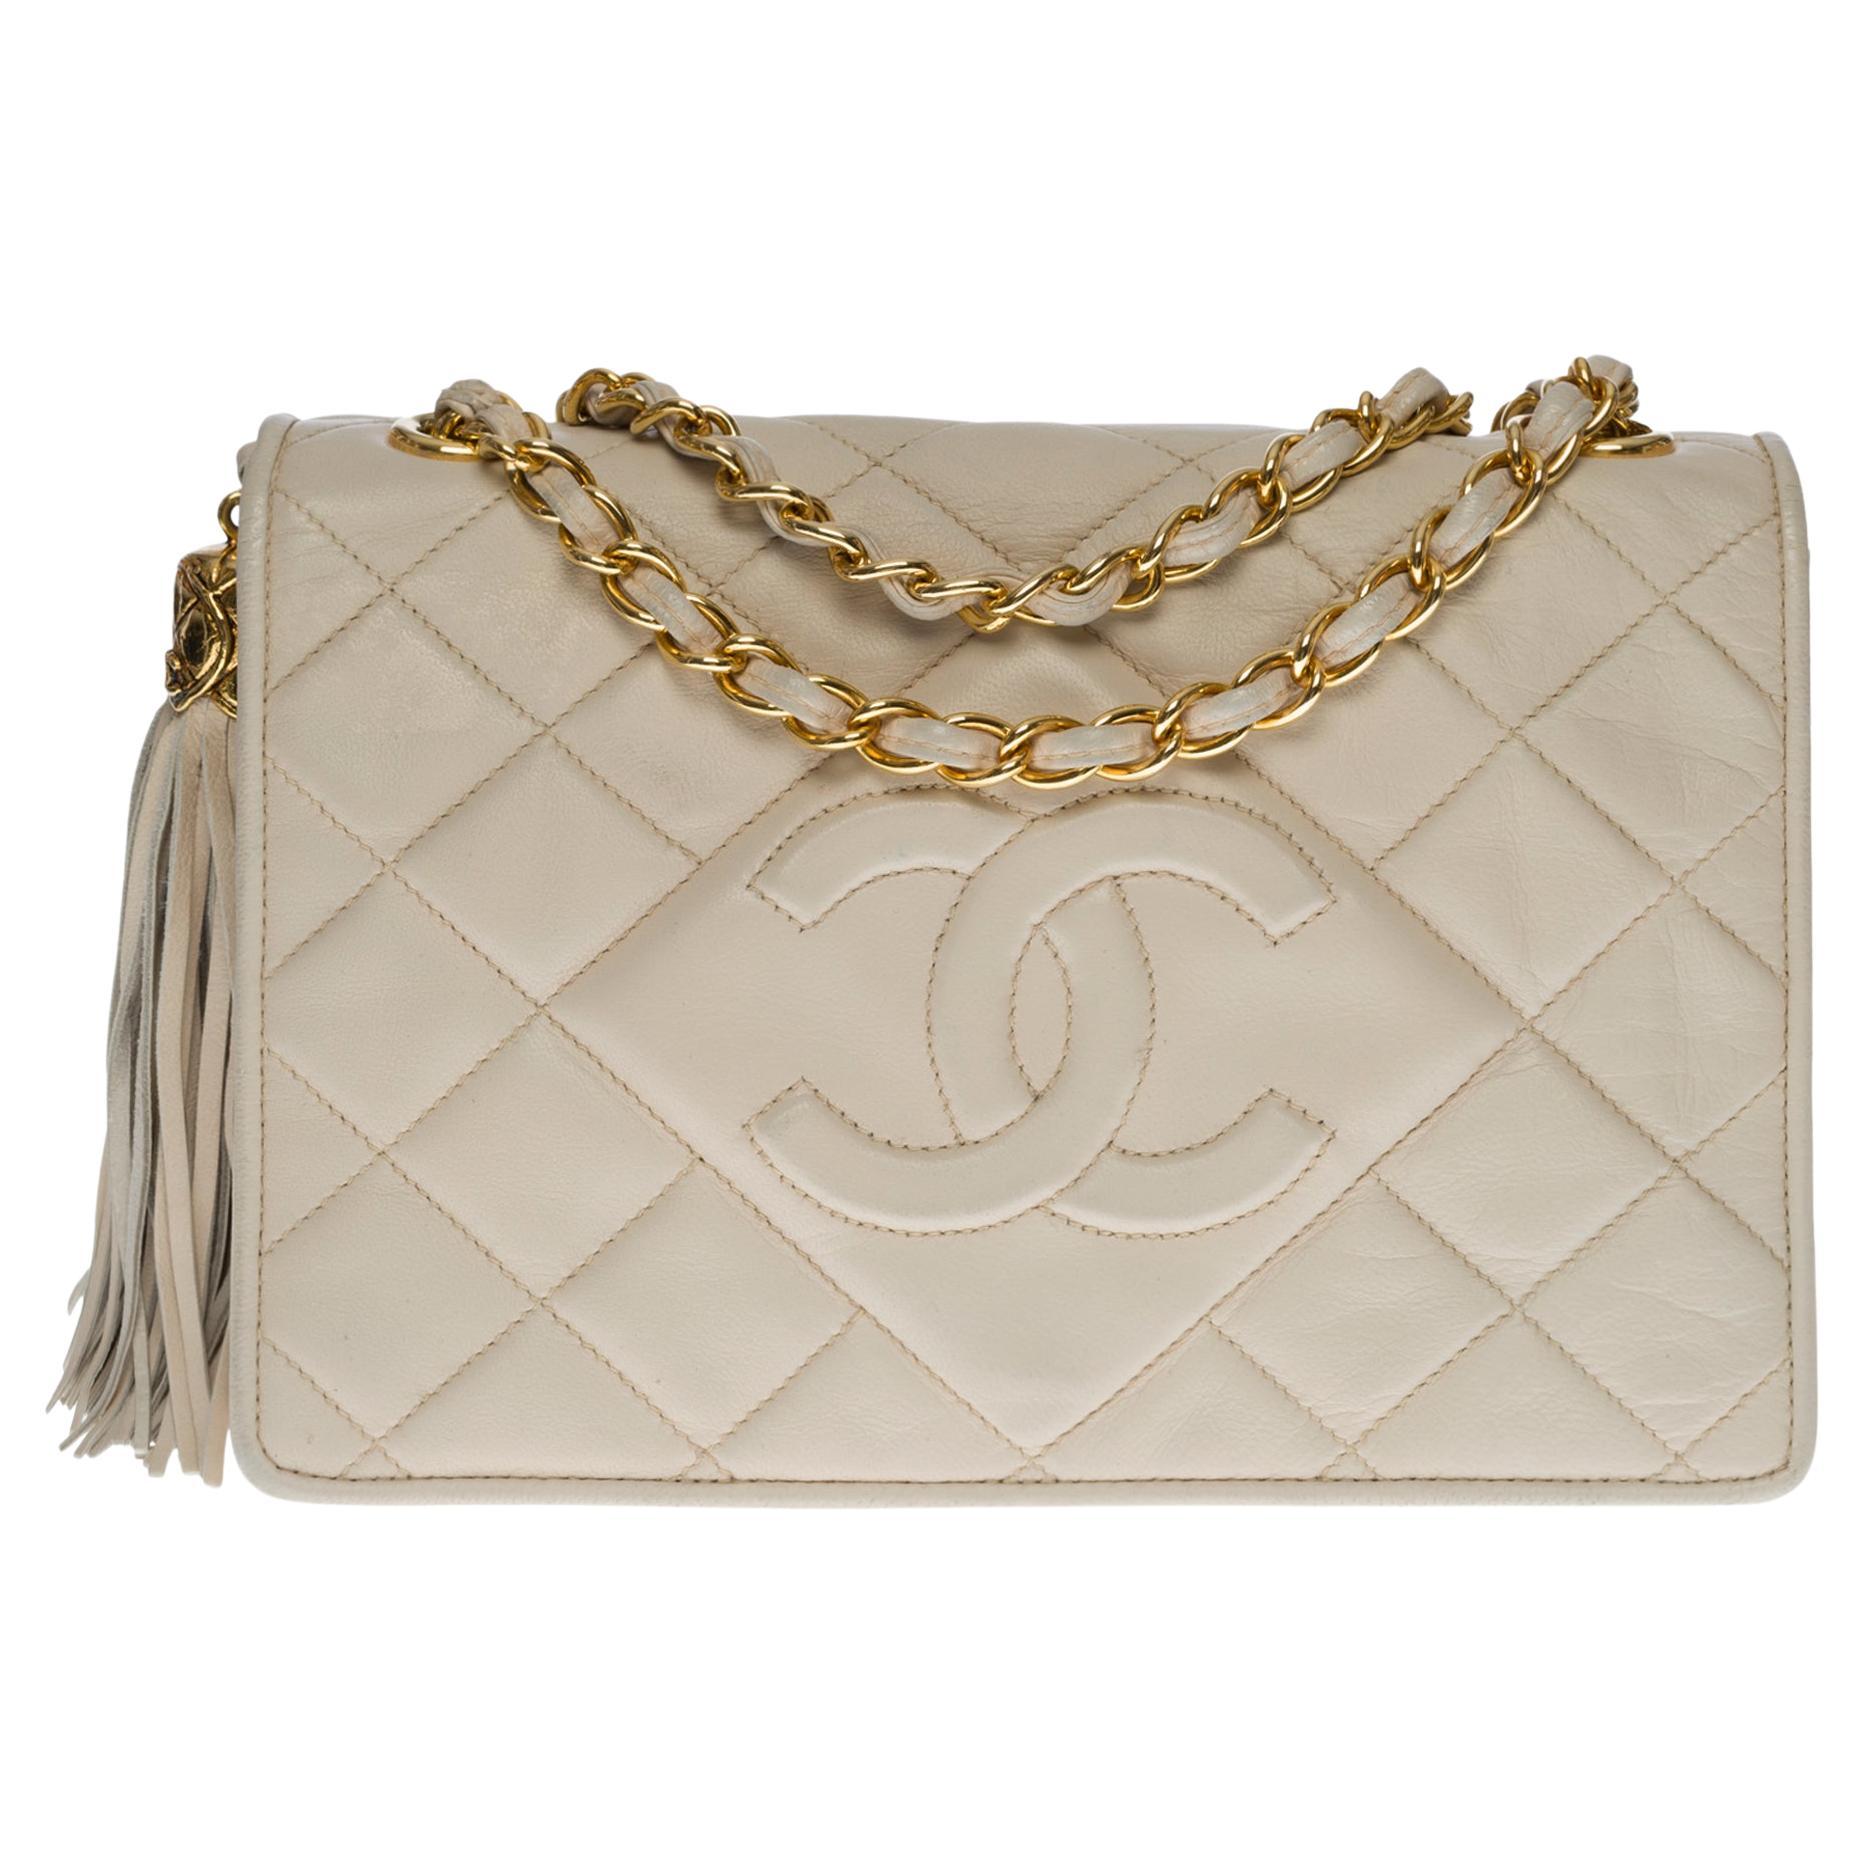 White Chanel Bags - 63 For Sale on 1stDibs | chanel bags white 